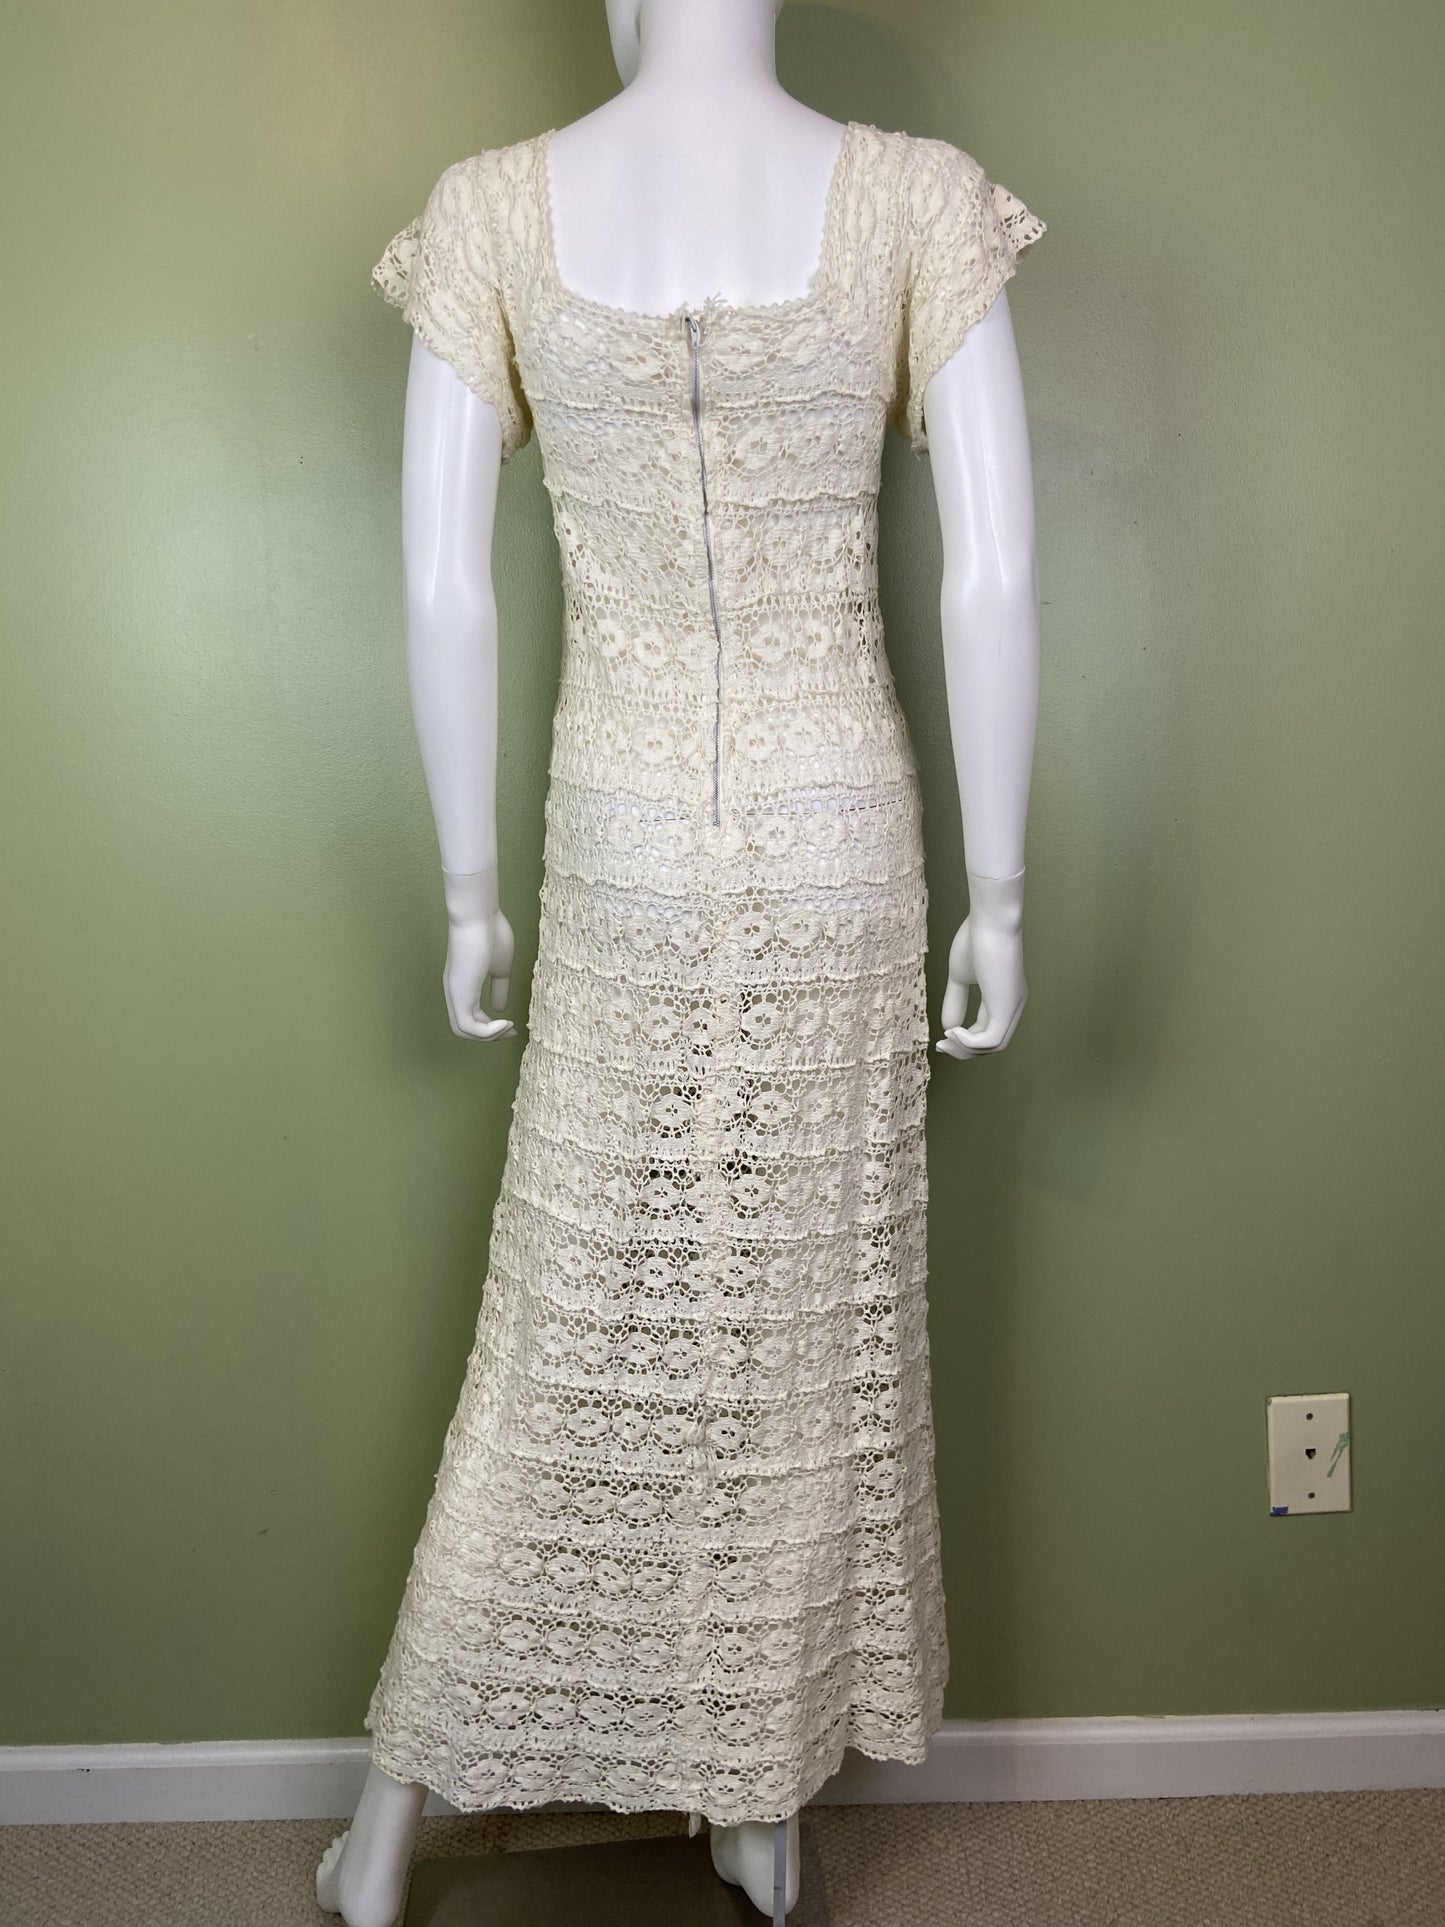 Vintage Bespoke Hand Knit Cream White Lace Crochet Gown